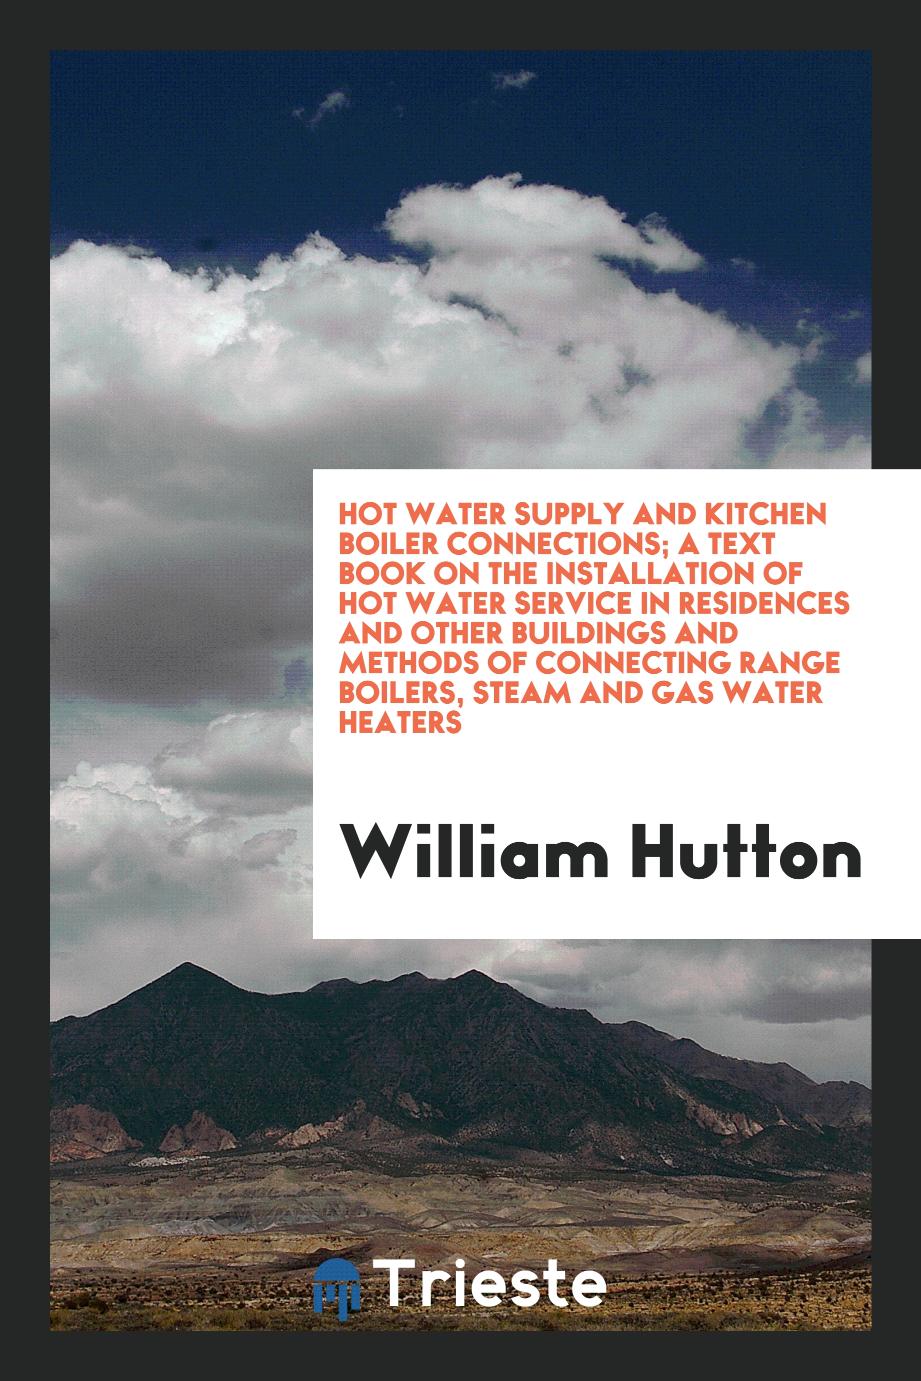 Hot water supply and kitchen boiler connections; a text book on the installation of hot water service in residences and other buildings and methods of connecting range boilers, steam and gas water heaters